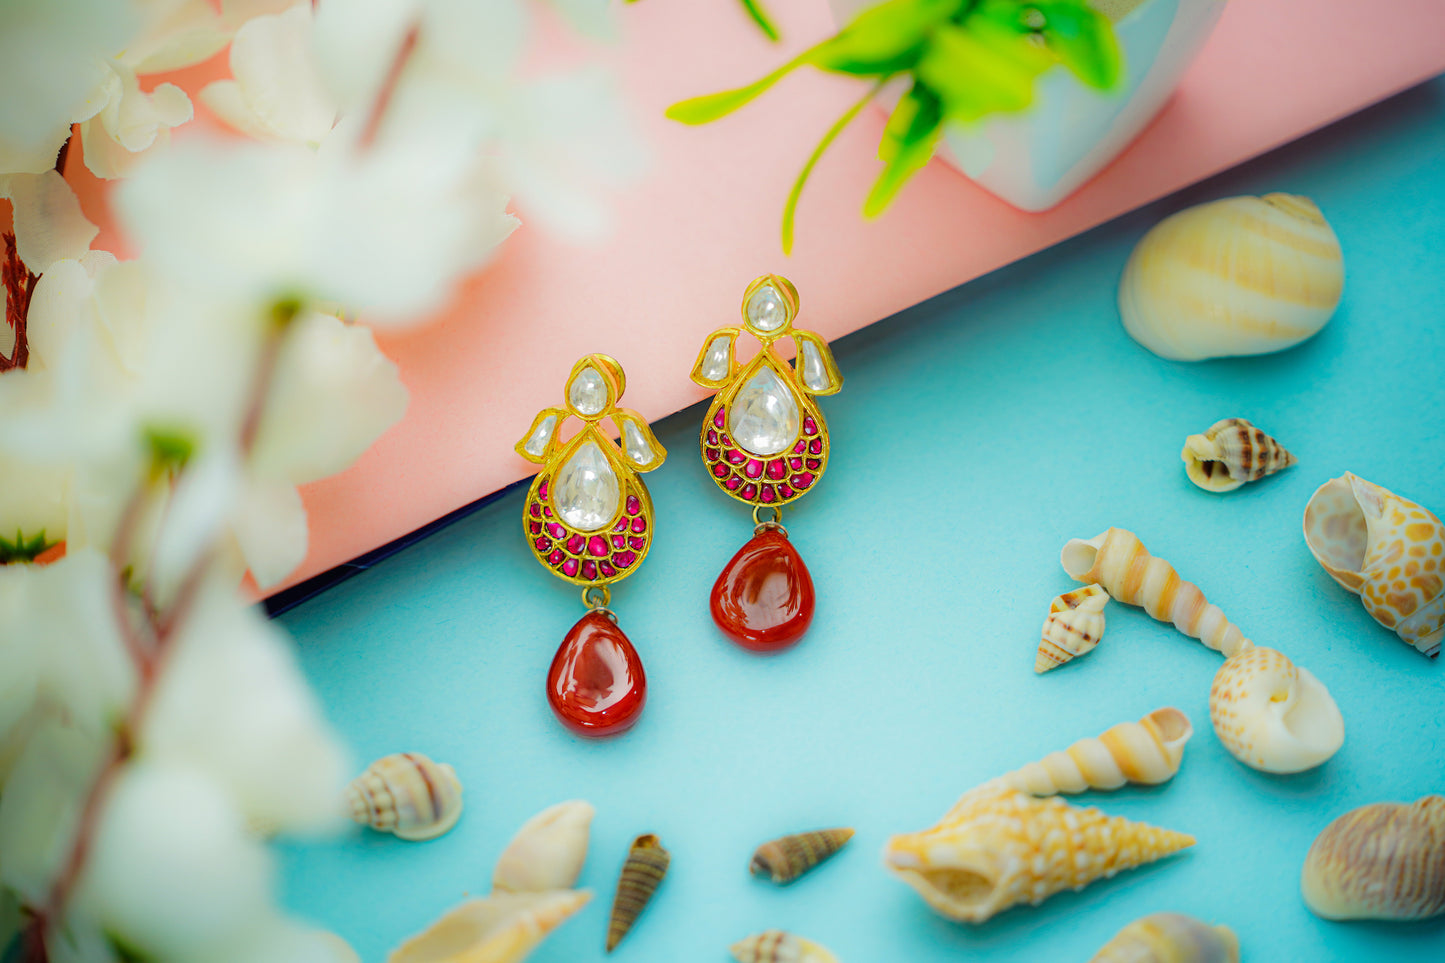 925 Silver Gold Plated Silver and Red Kunan Earrings with Drop - Neeta Boochra Jewellery